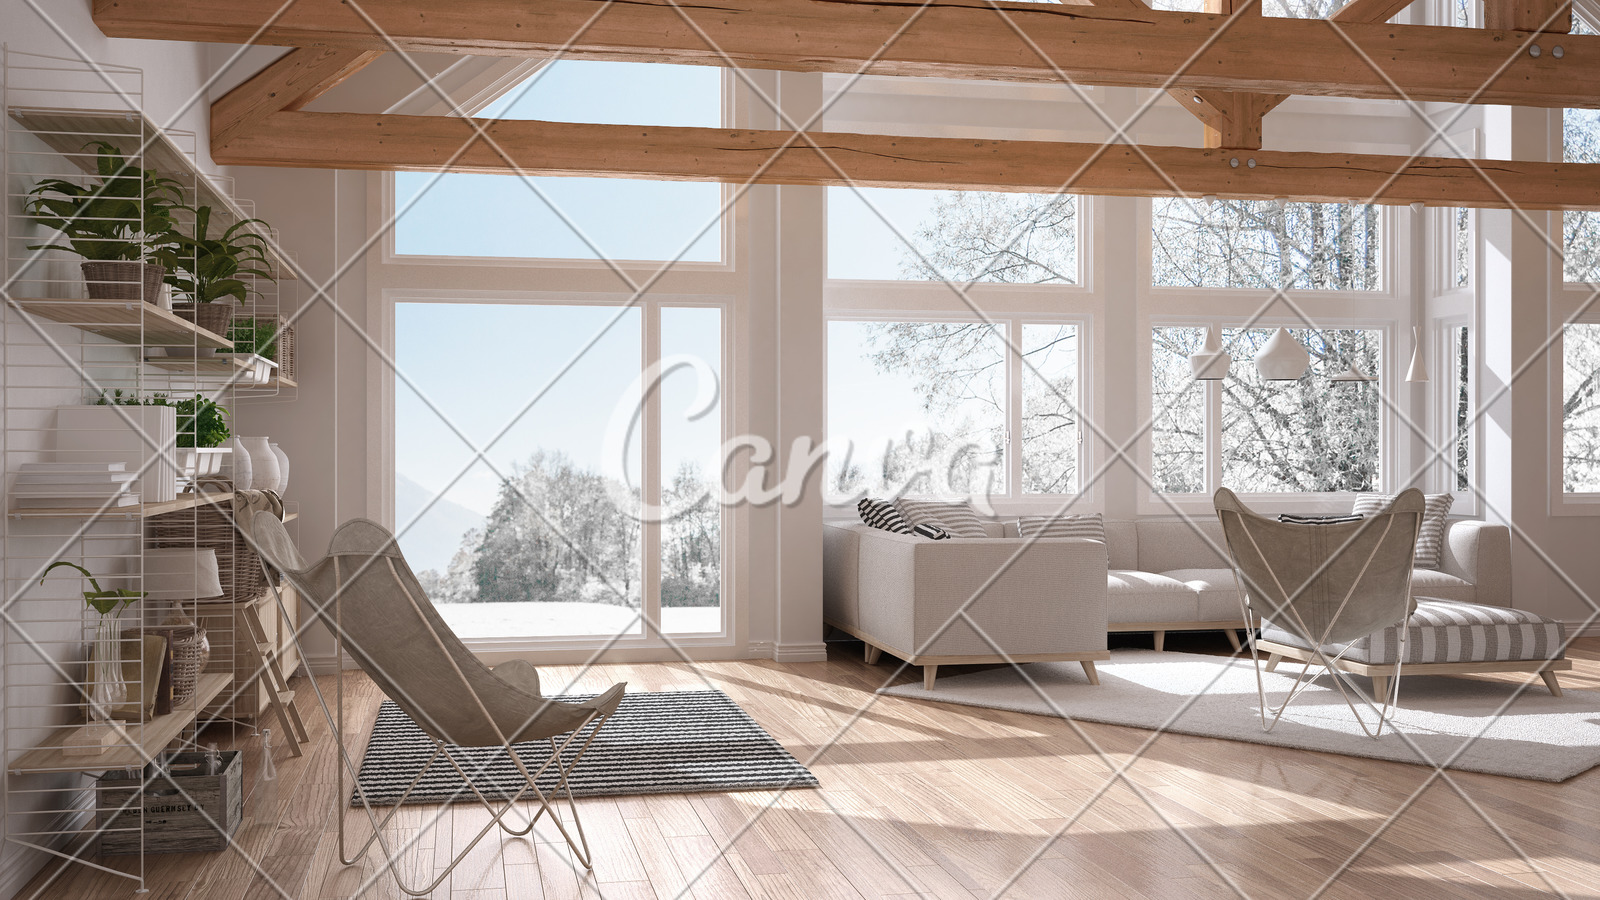 Living Room Of Luxury Eco House Parquet Floor And Wooden